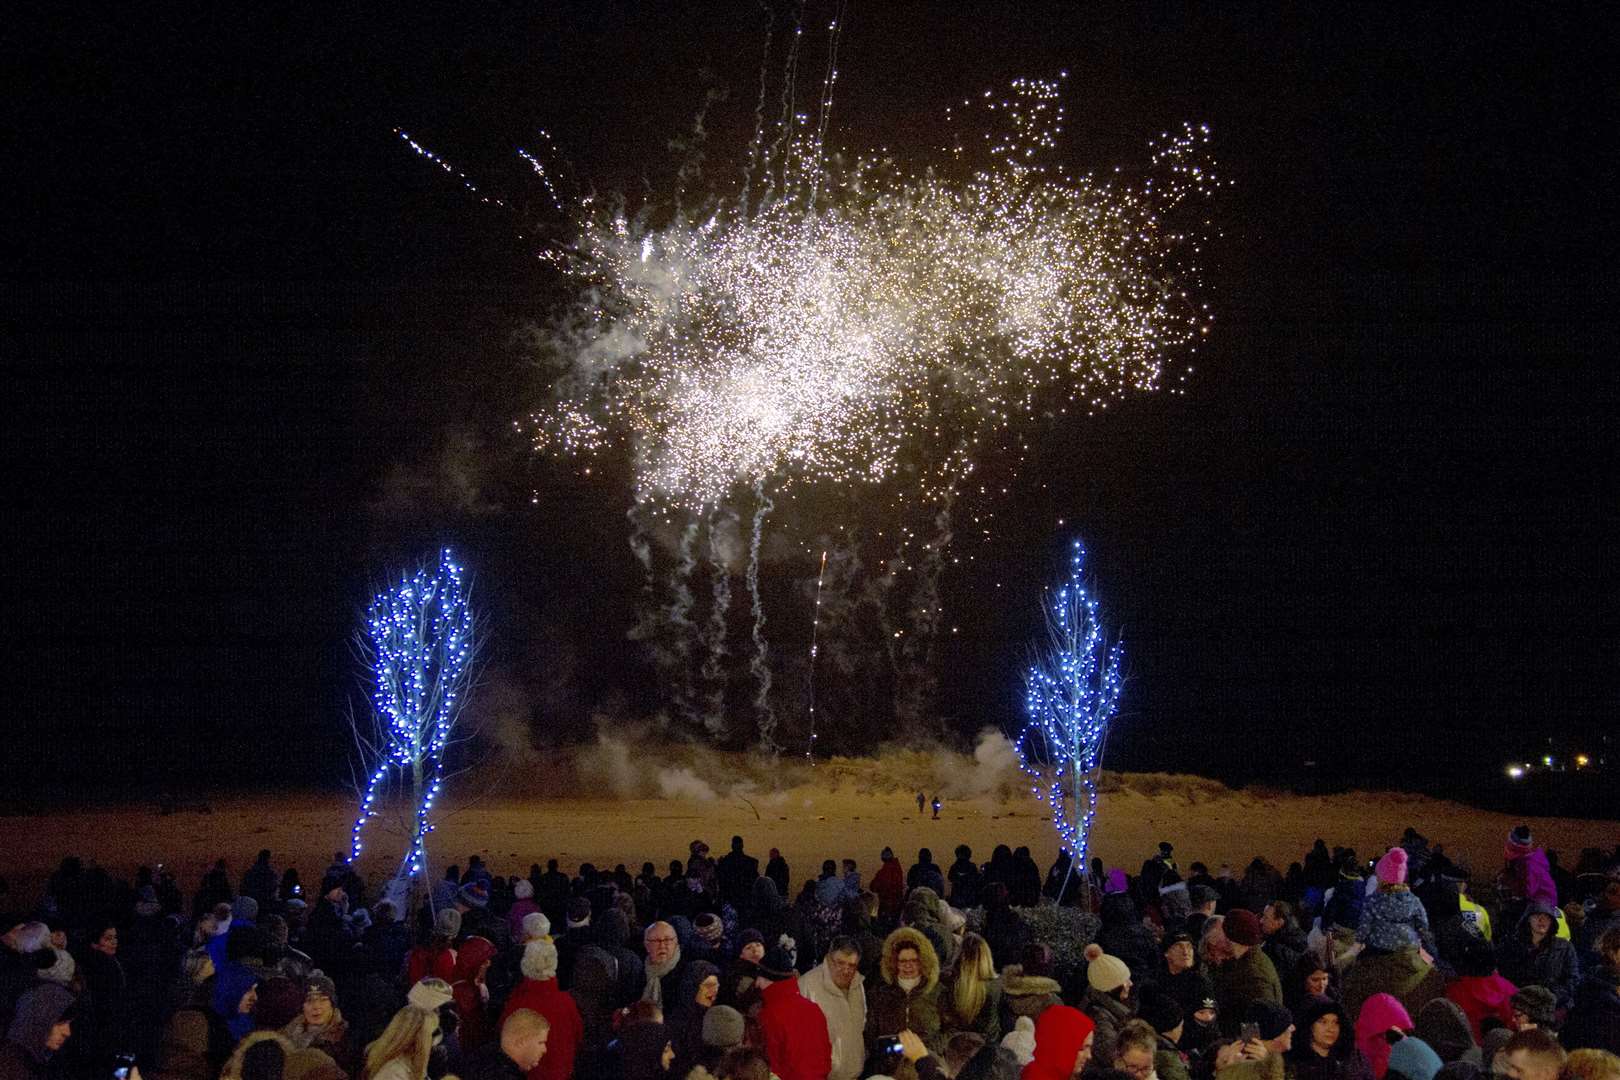 Lossiemouth has become renowned for its community spirit at the Christmas lights event.